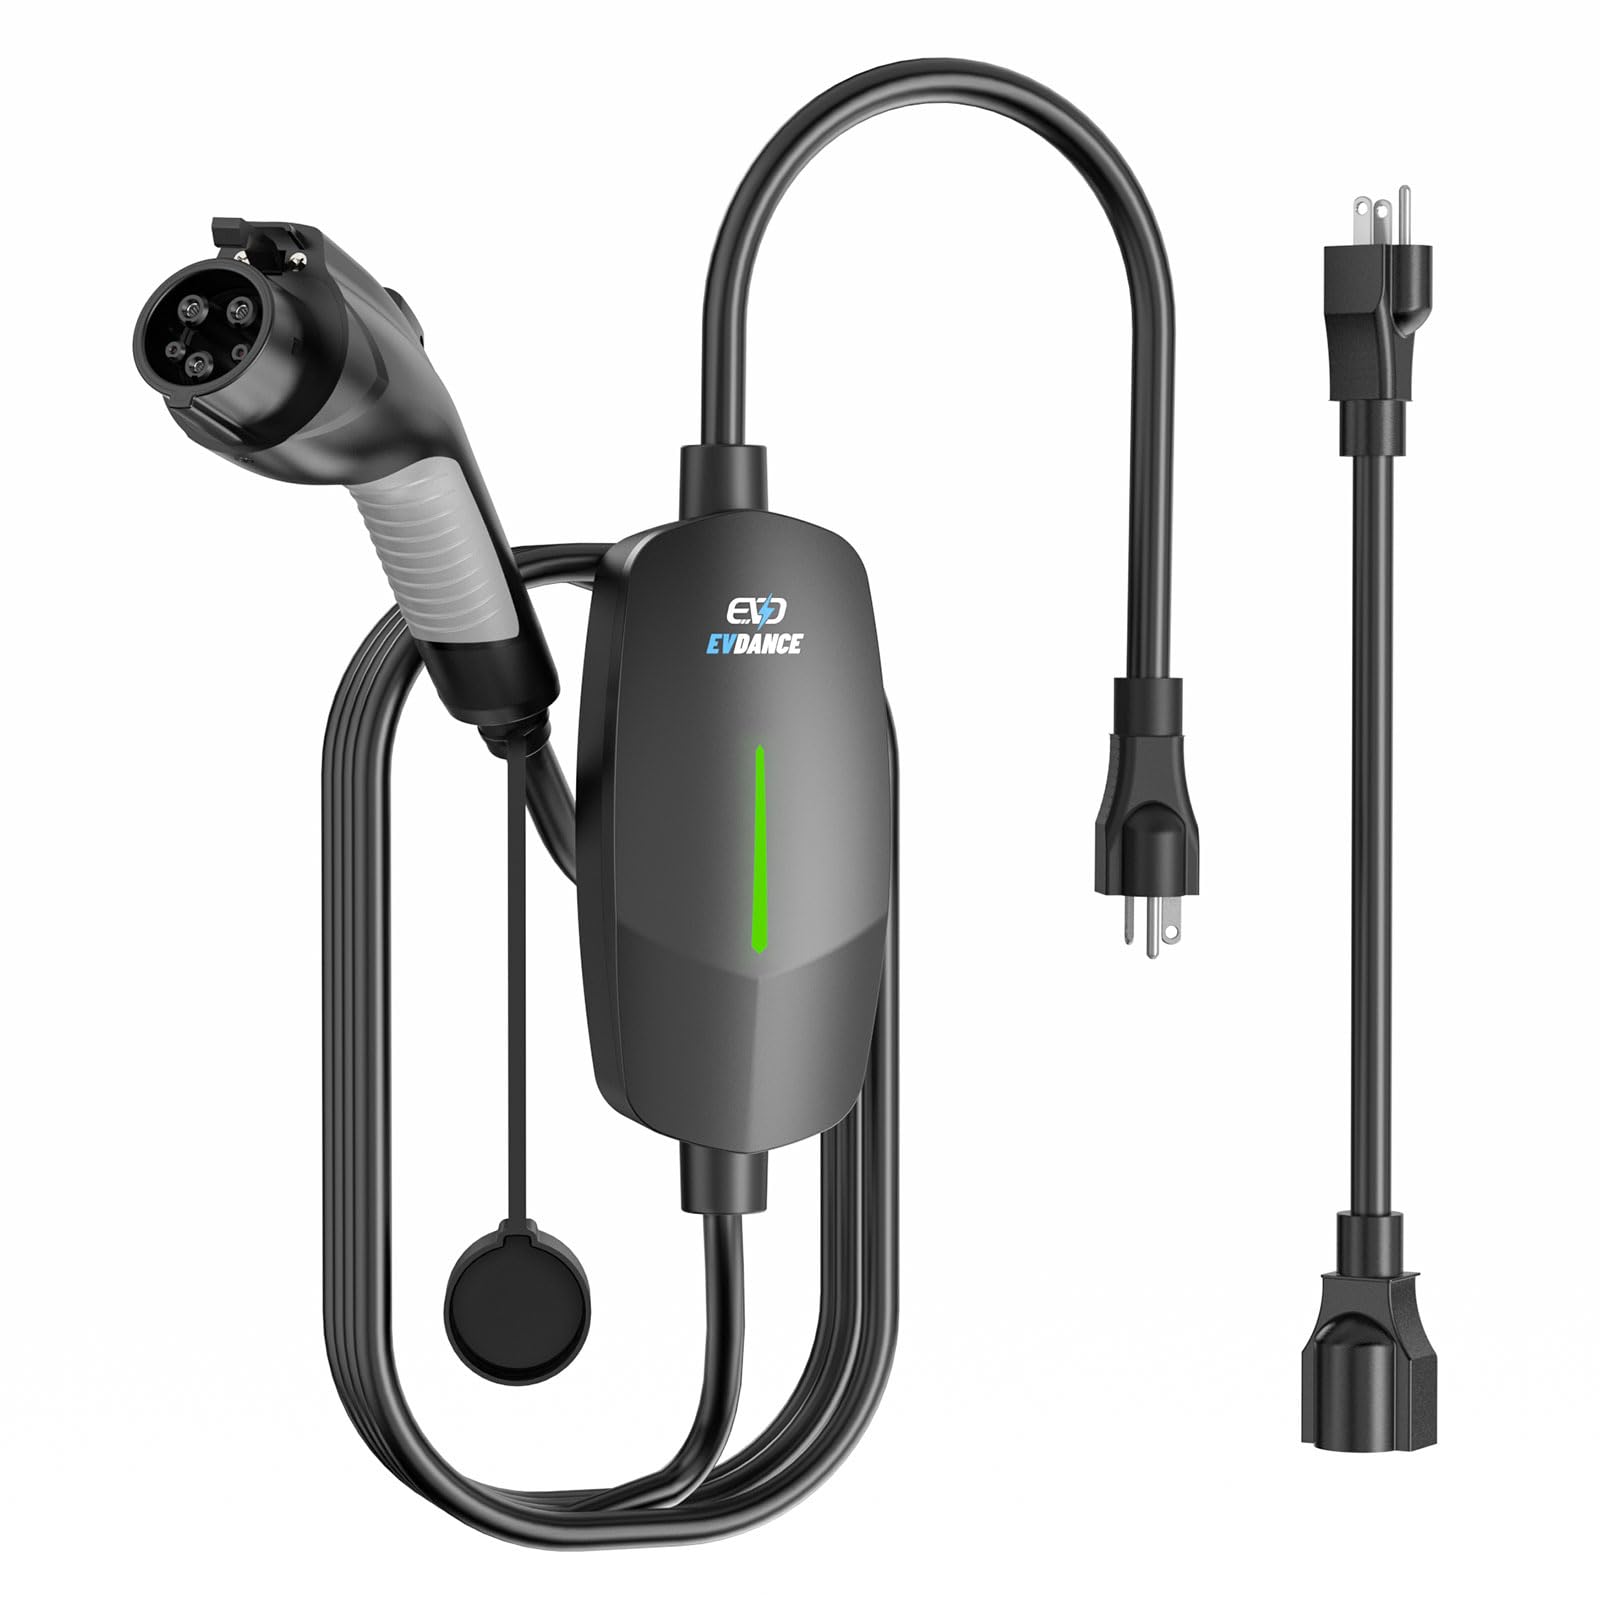 Portable Chargers for Electric Cars